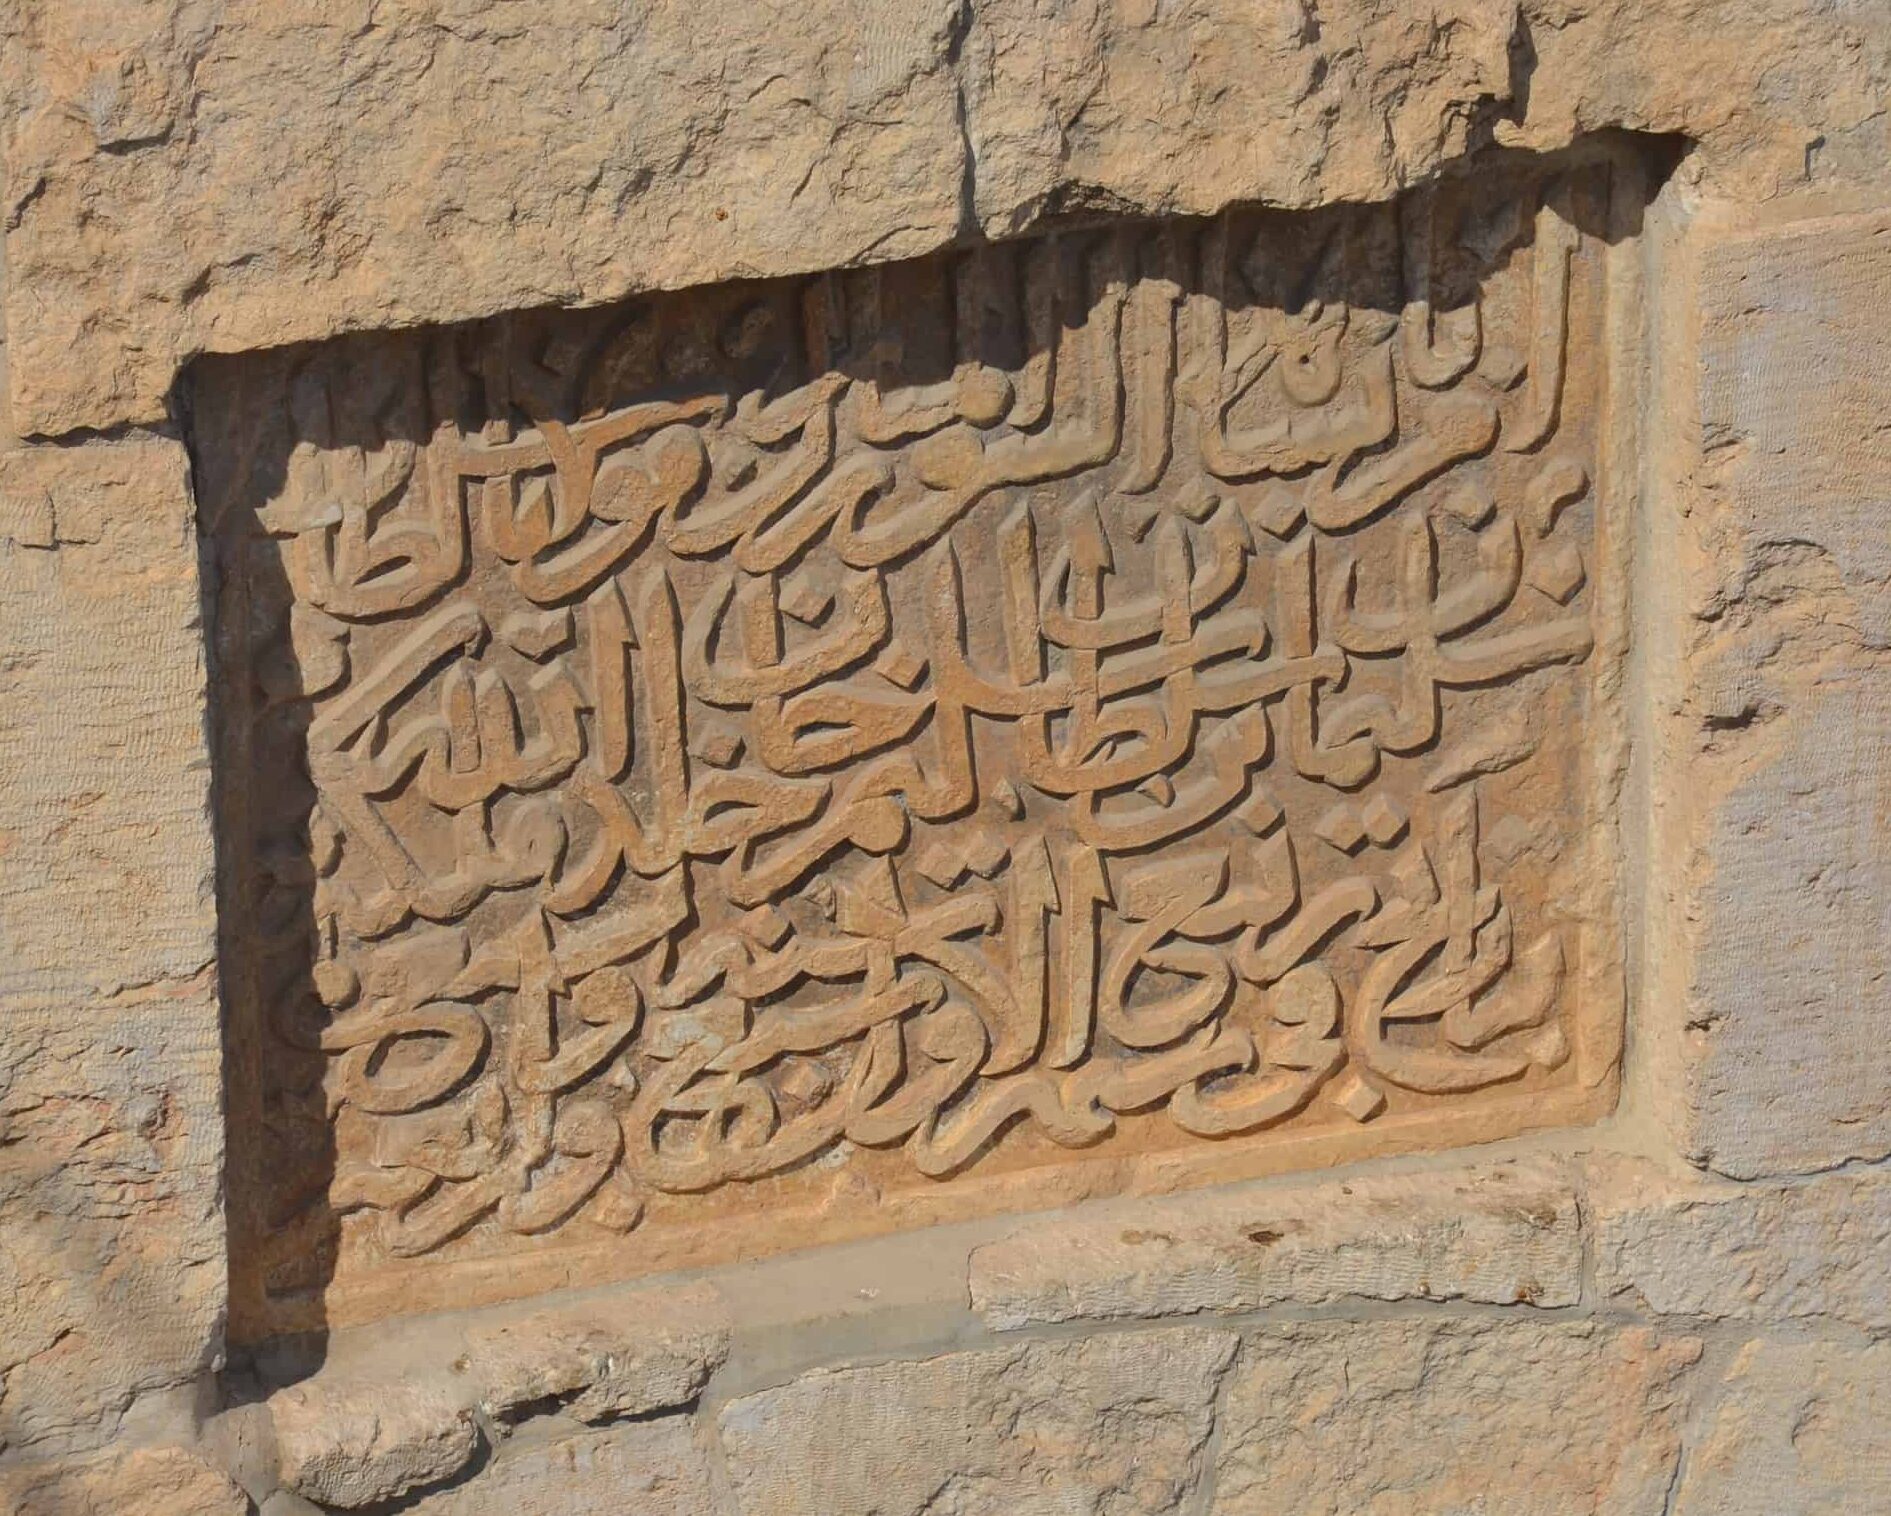 Ottoman inscription on the inside of the Zion Gate